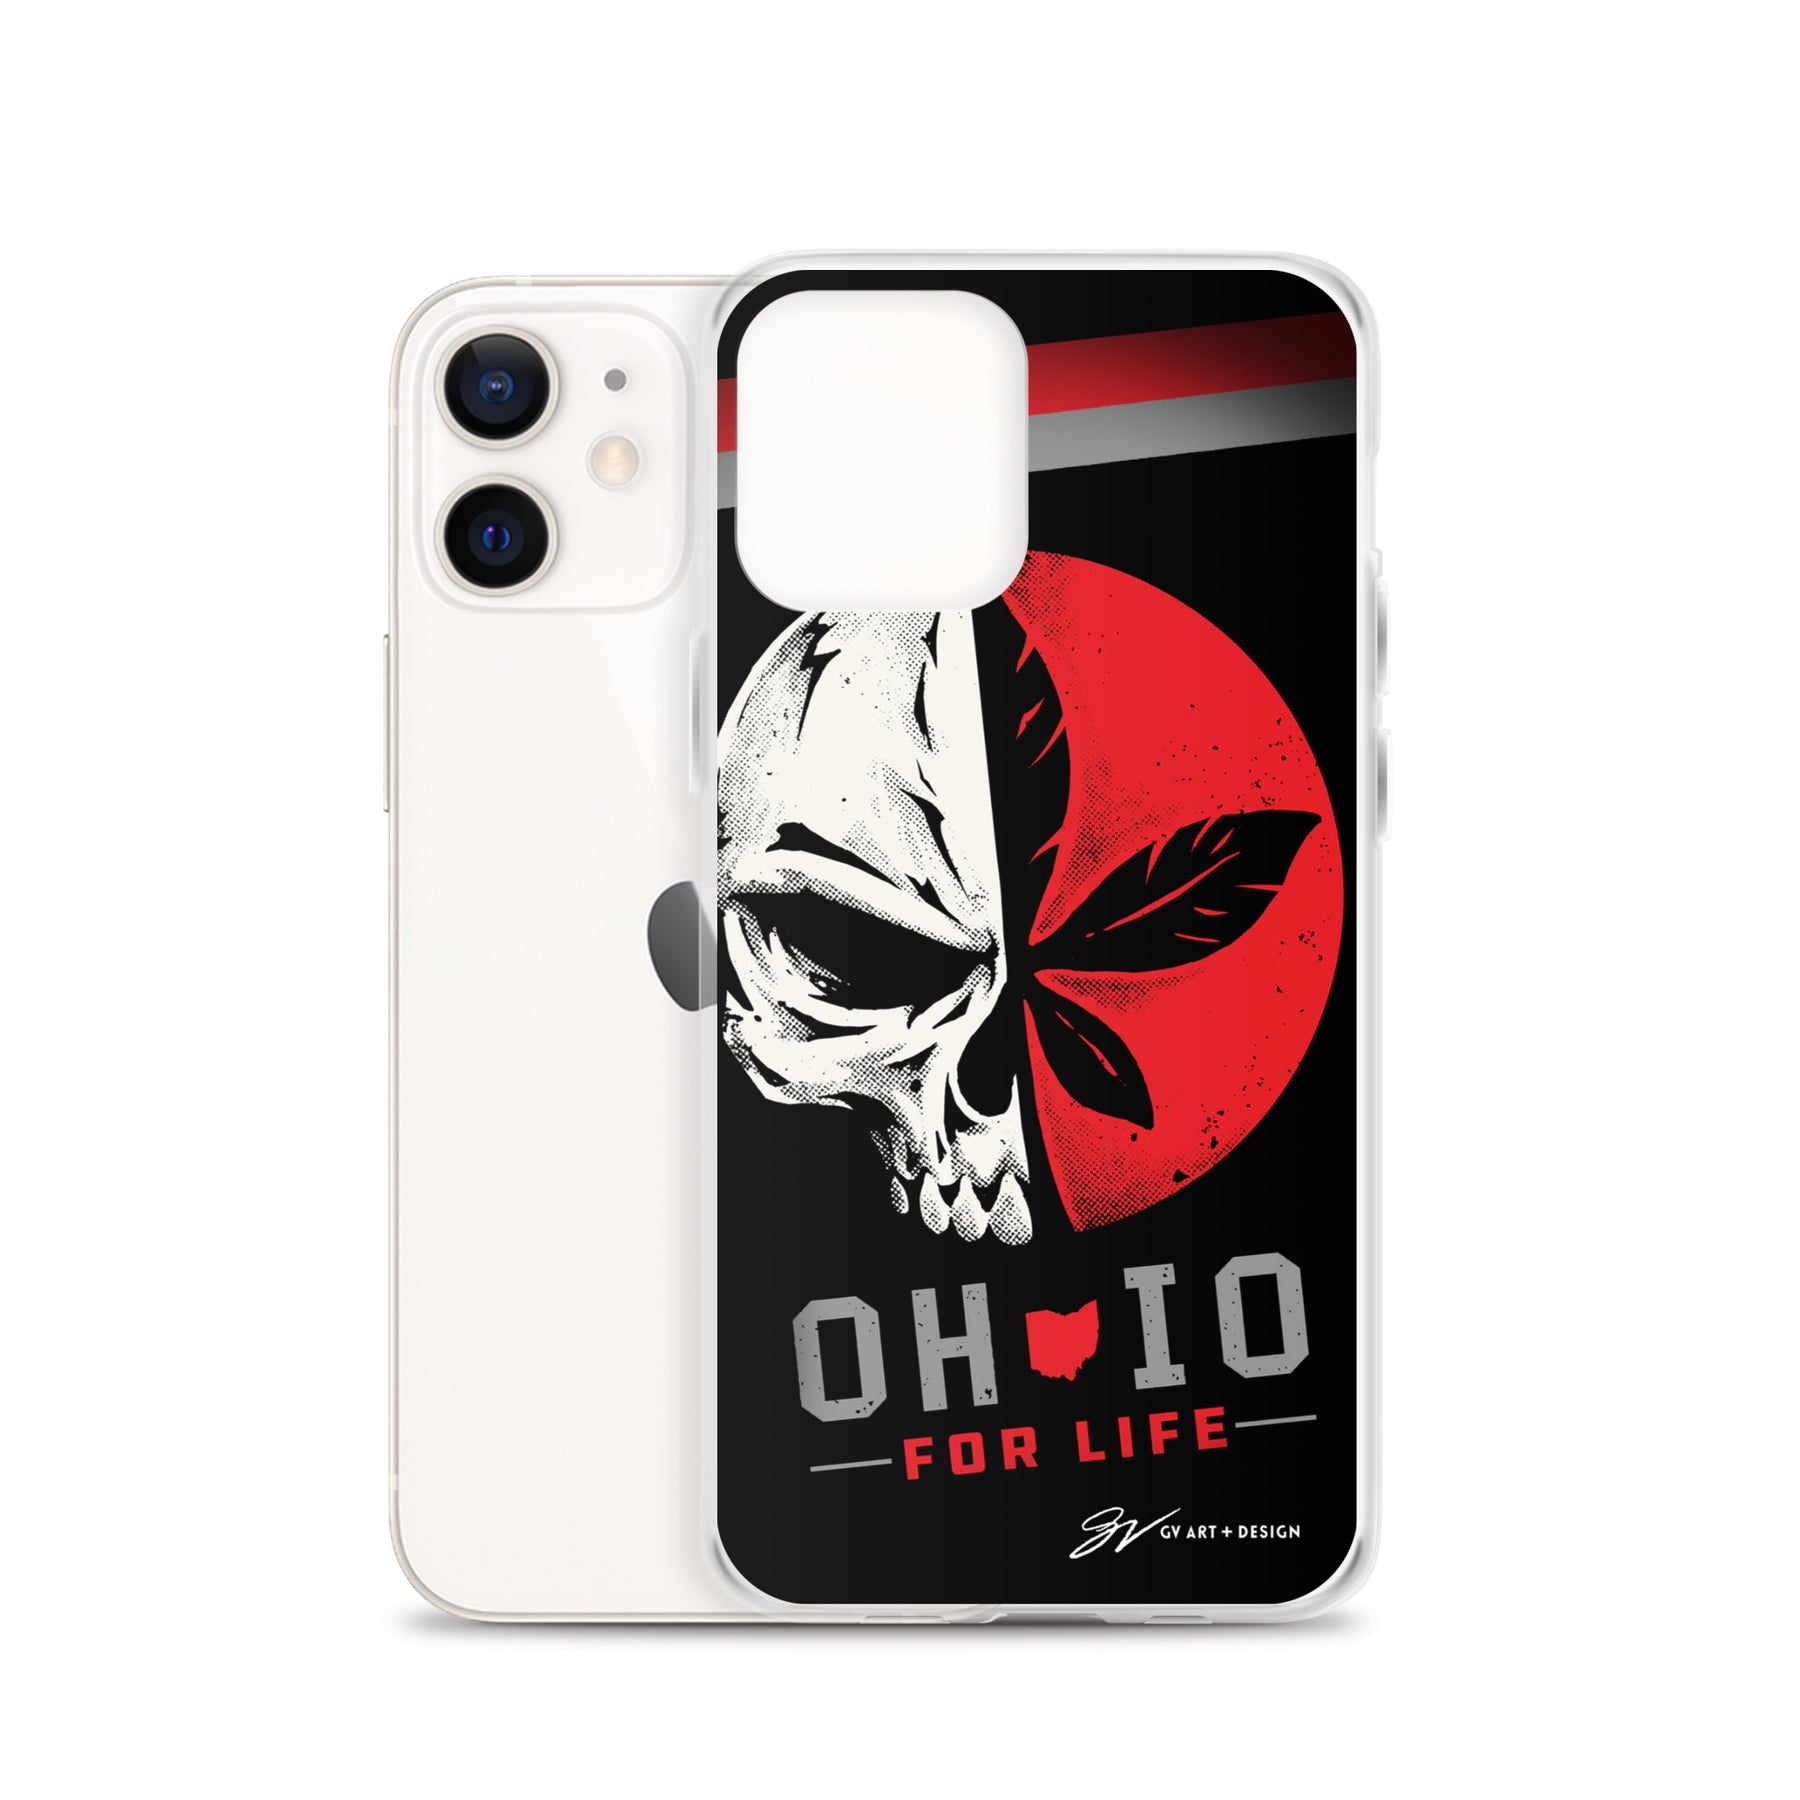 OH-IO For Life iPhone Case